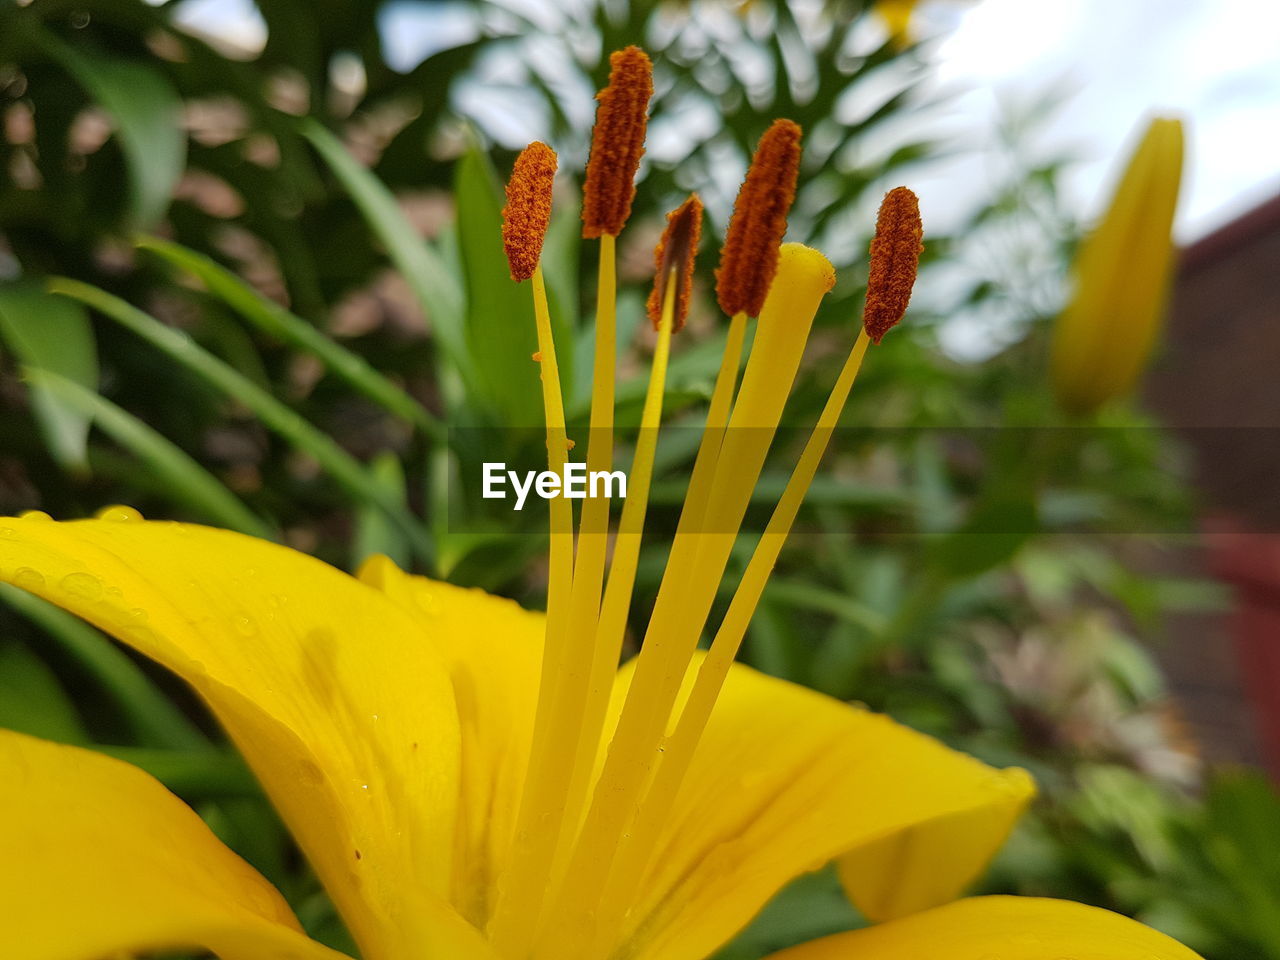 CLOSE-UP OF FRESH YELLOW FLOWER BLOOMING IN PLANT